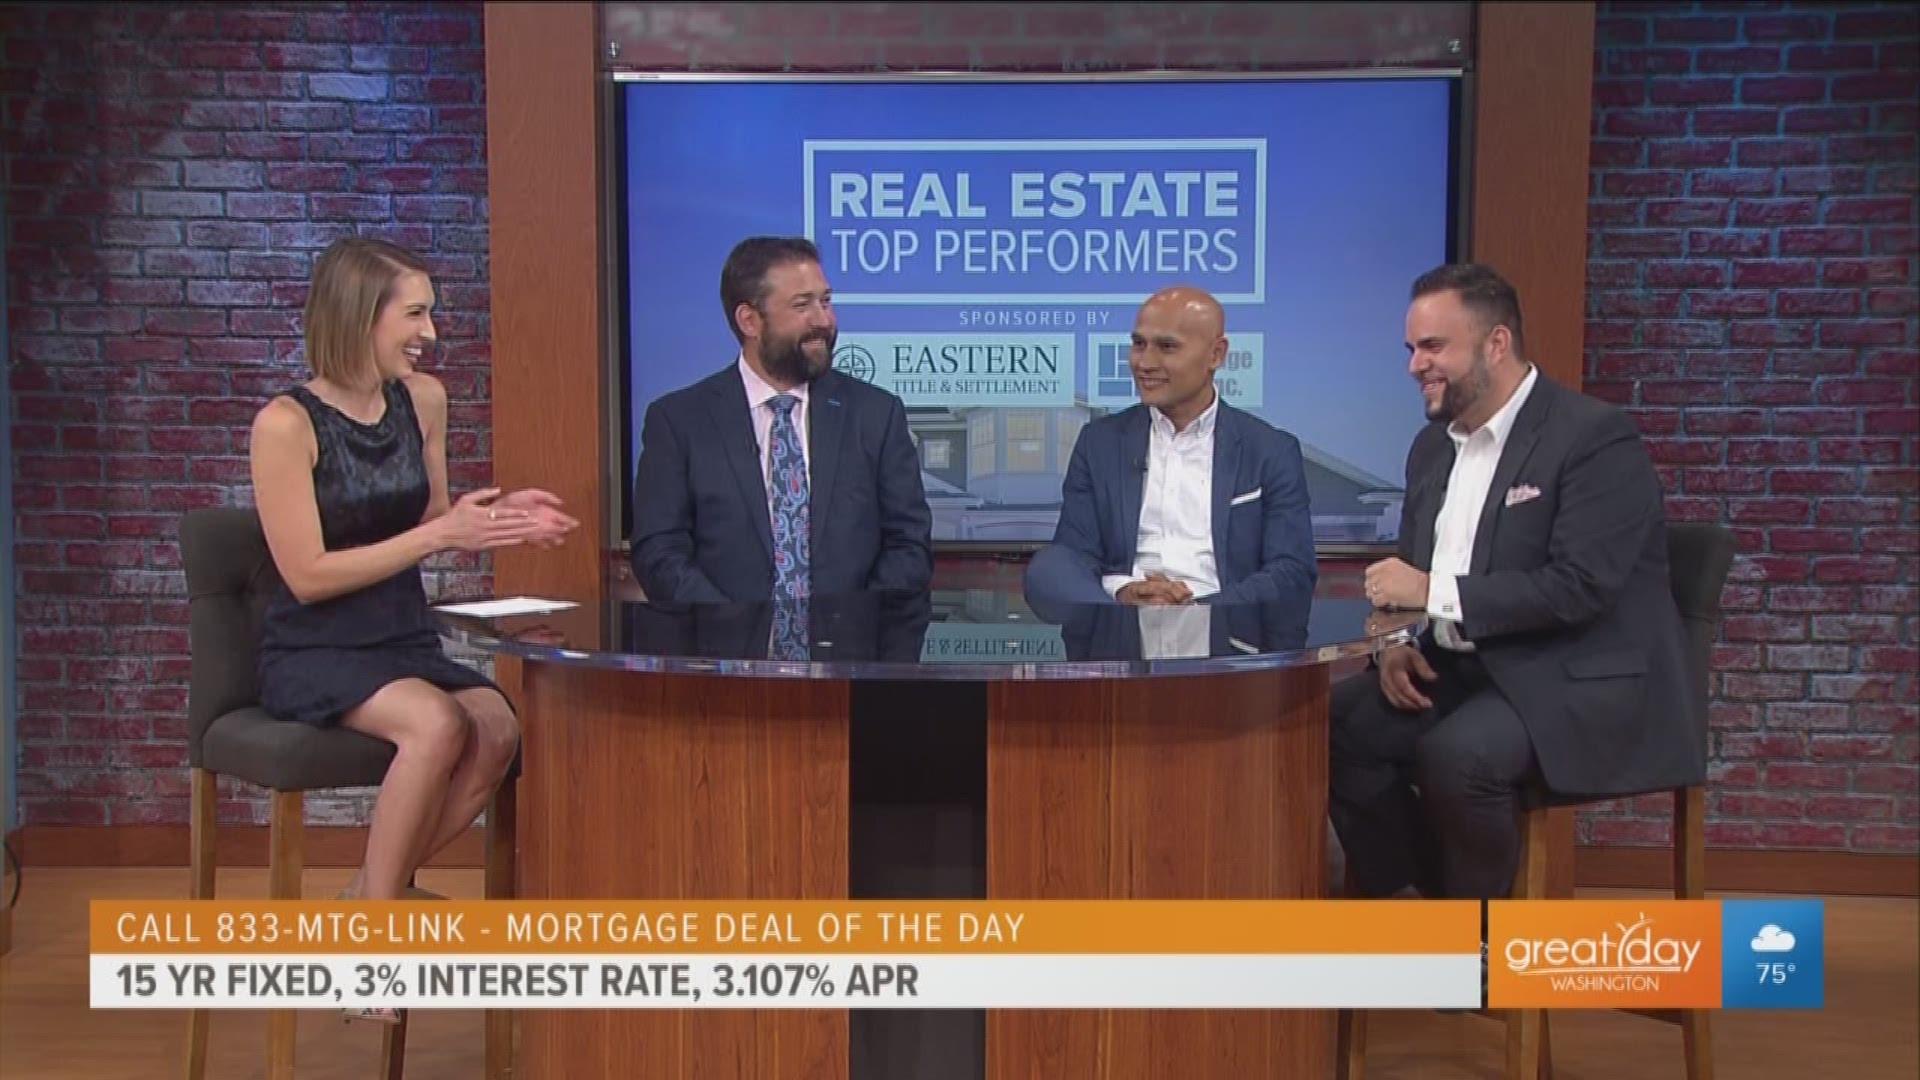 Ricardo Cardenas, Juan Umanzor and Ben Goldman provide their positive outlook on the real estate market this fall! Sponsored by the Real Estate Top Performers.